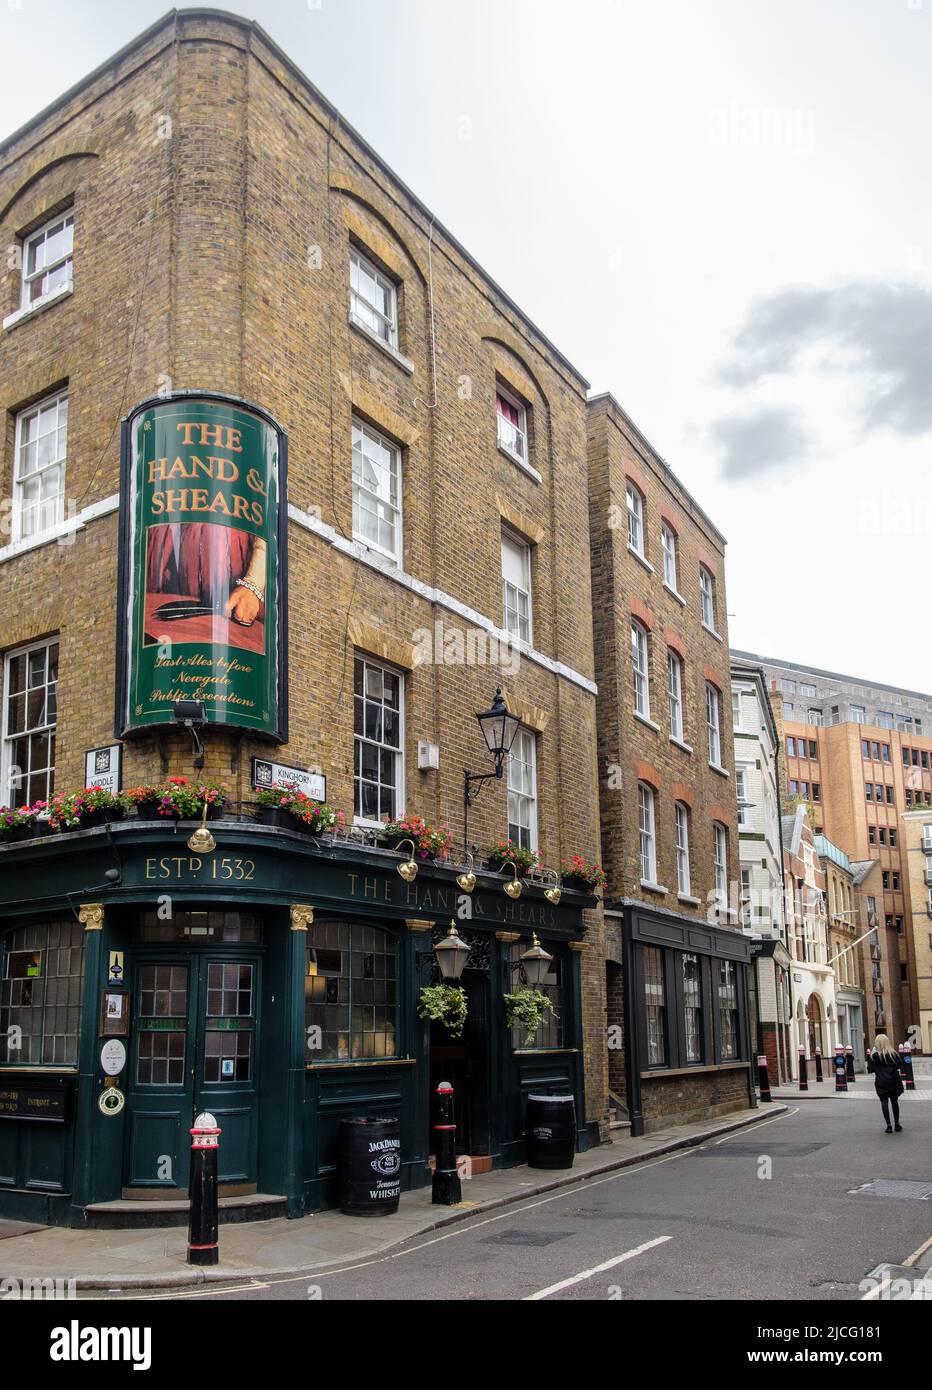 The Hand and Shears pub, at the corner of Cloth Fair and Kinghorn Street, Smithfield, London. Stock Photo